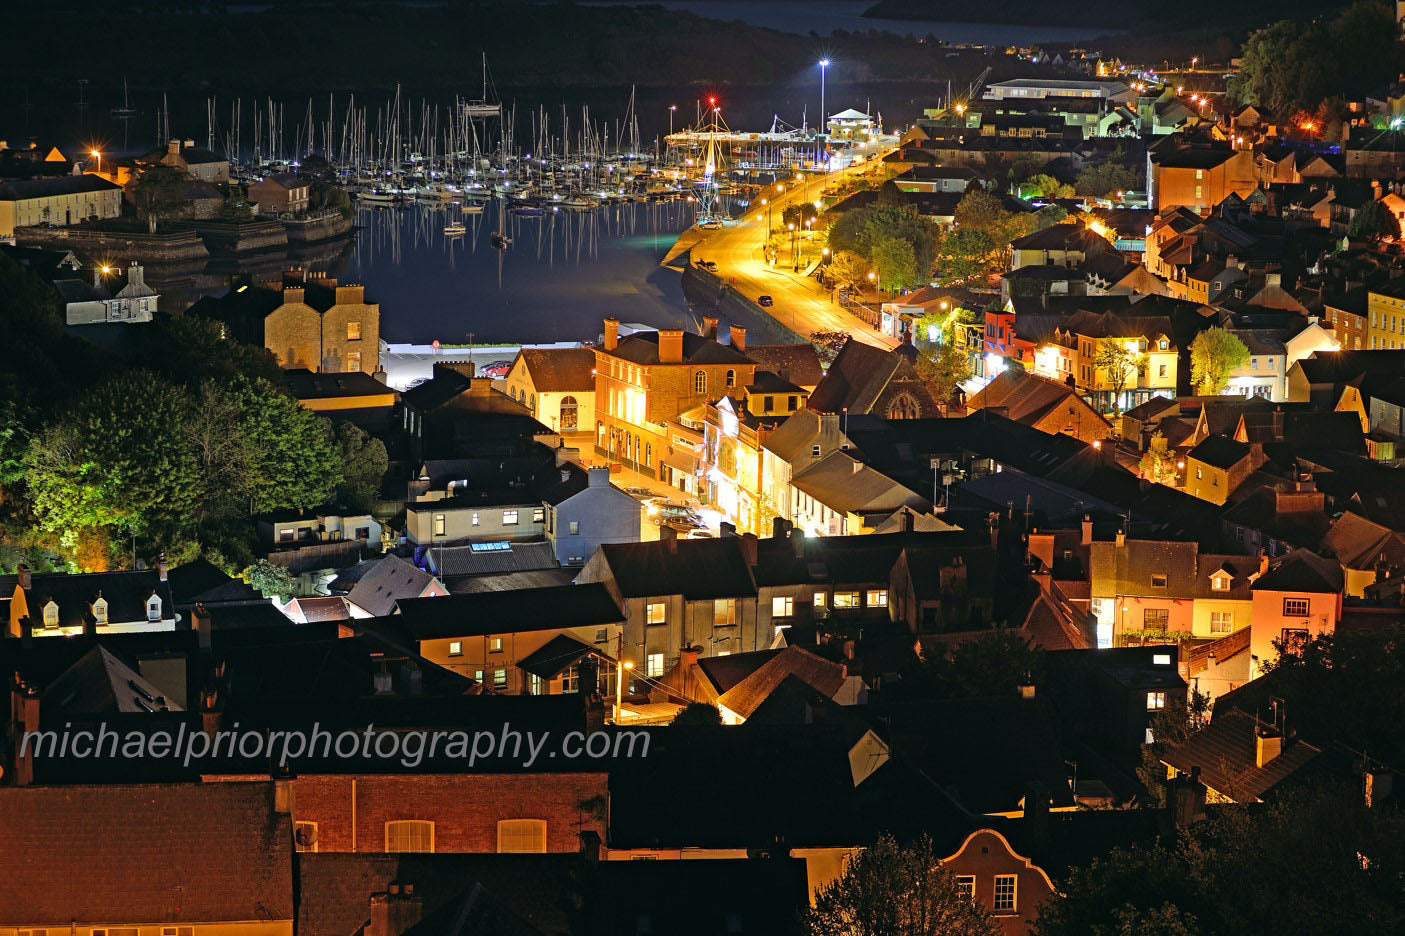 Kinsale Streets At Night - Michael Prior Photography 